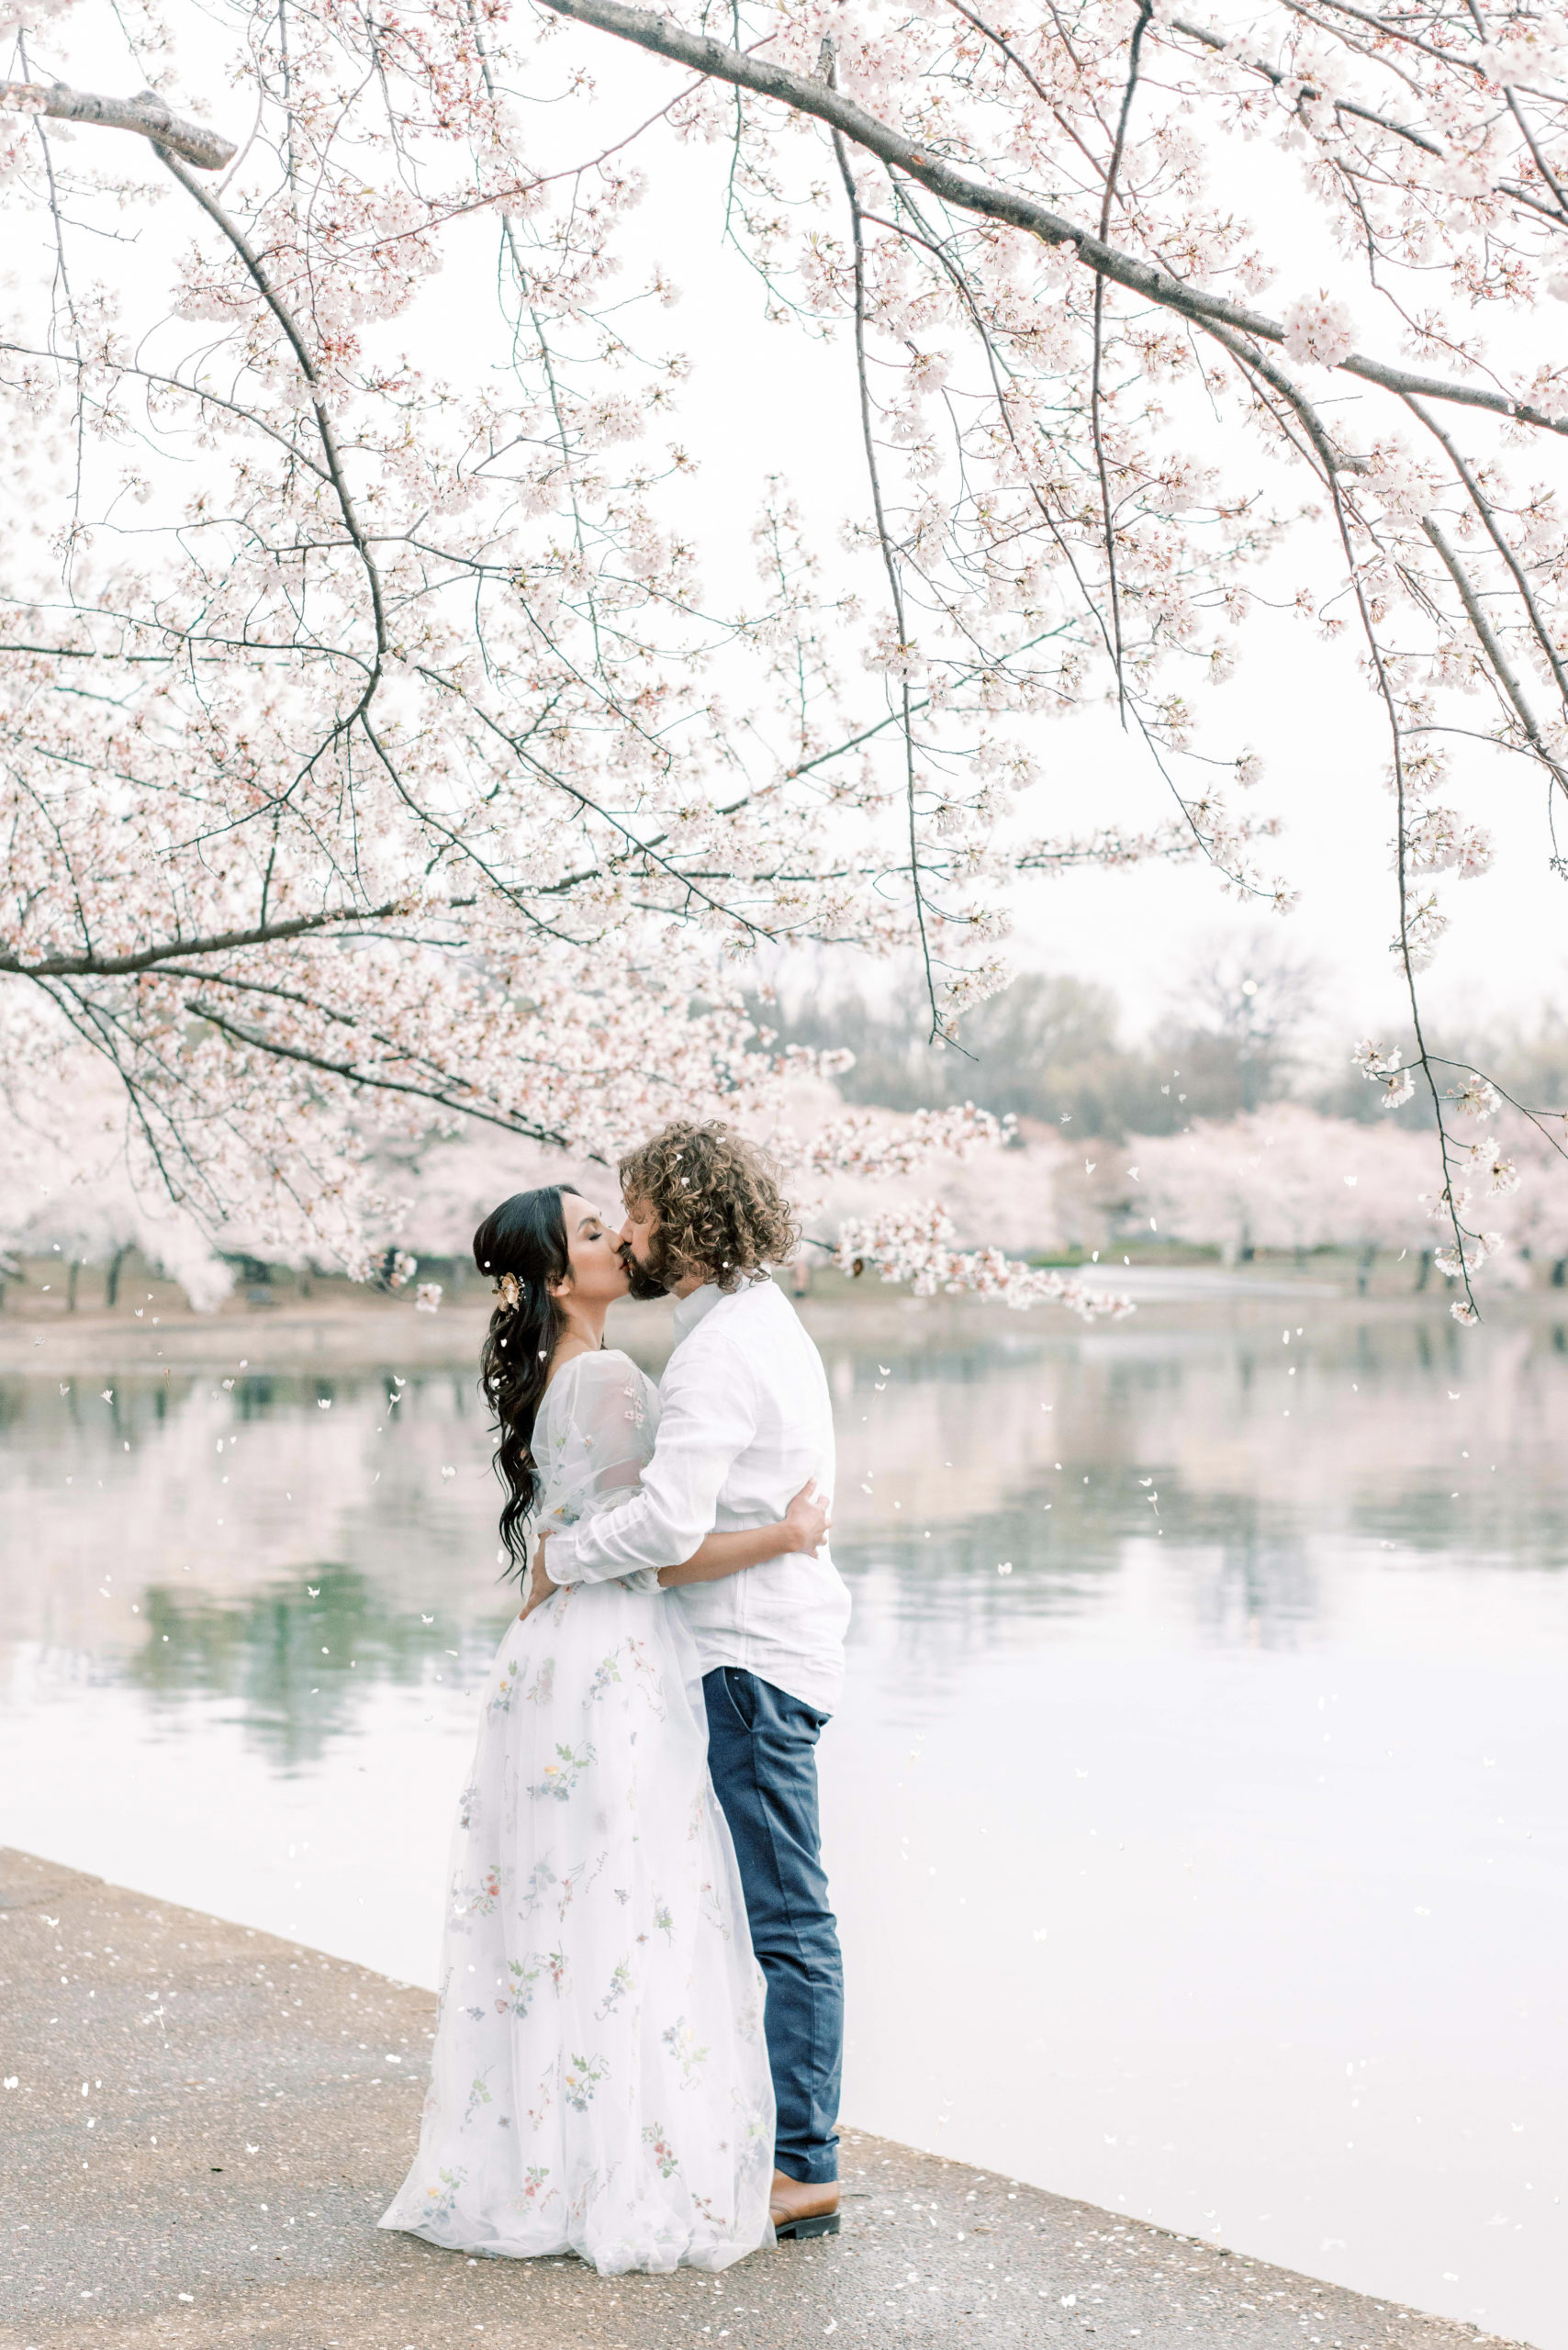 Ultimate guide to a cherry blossom engagement session in Washington, DC during peak bloom.